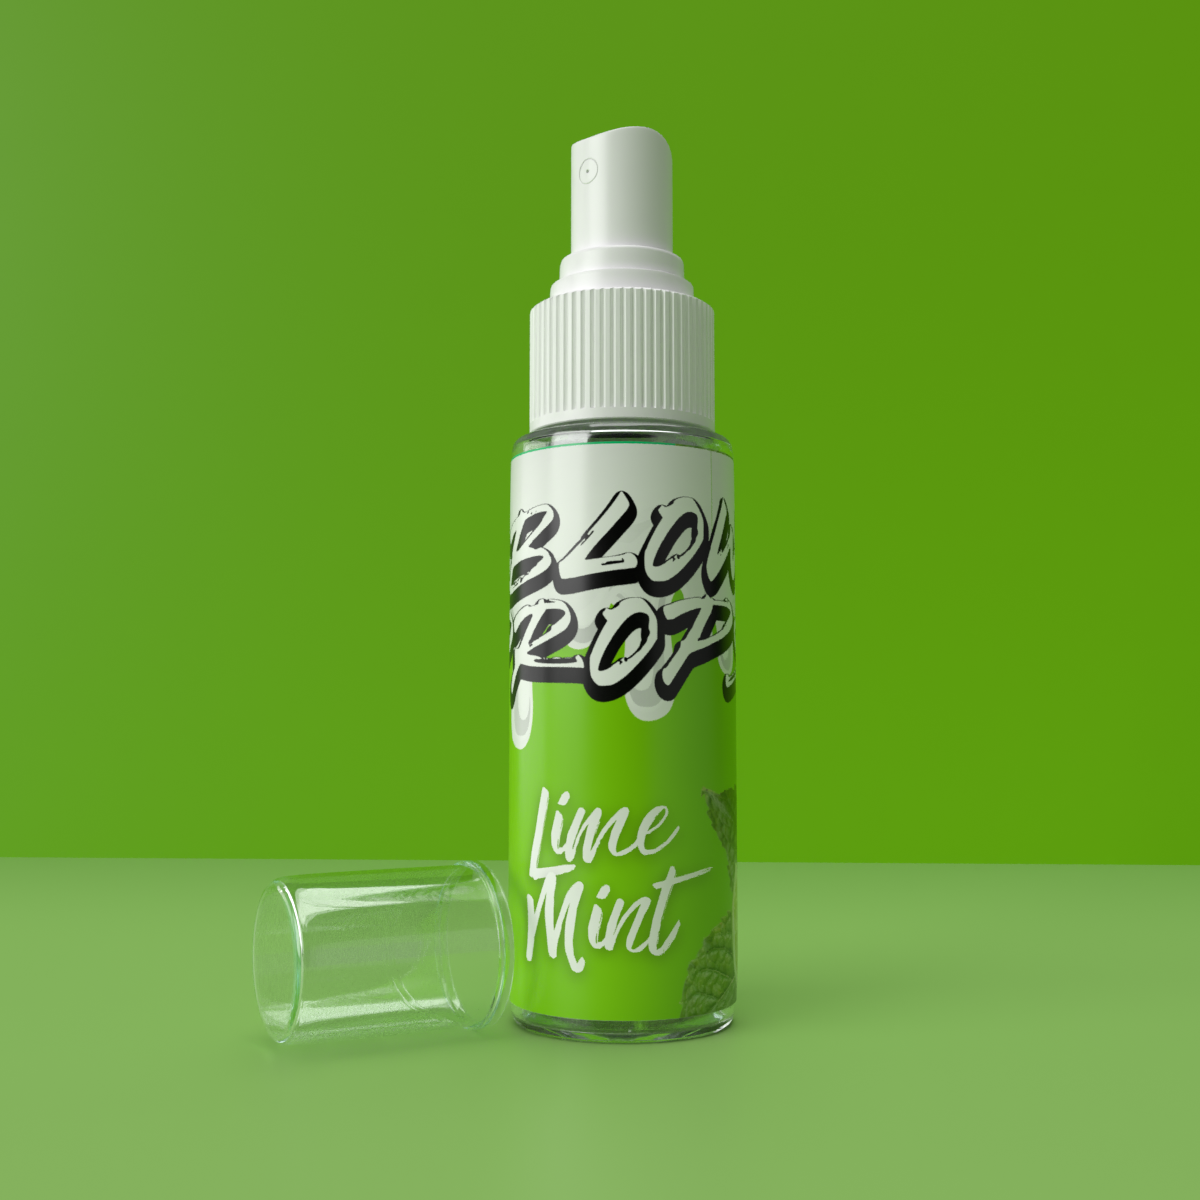 Menthe lime